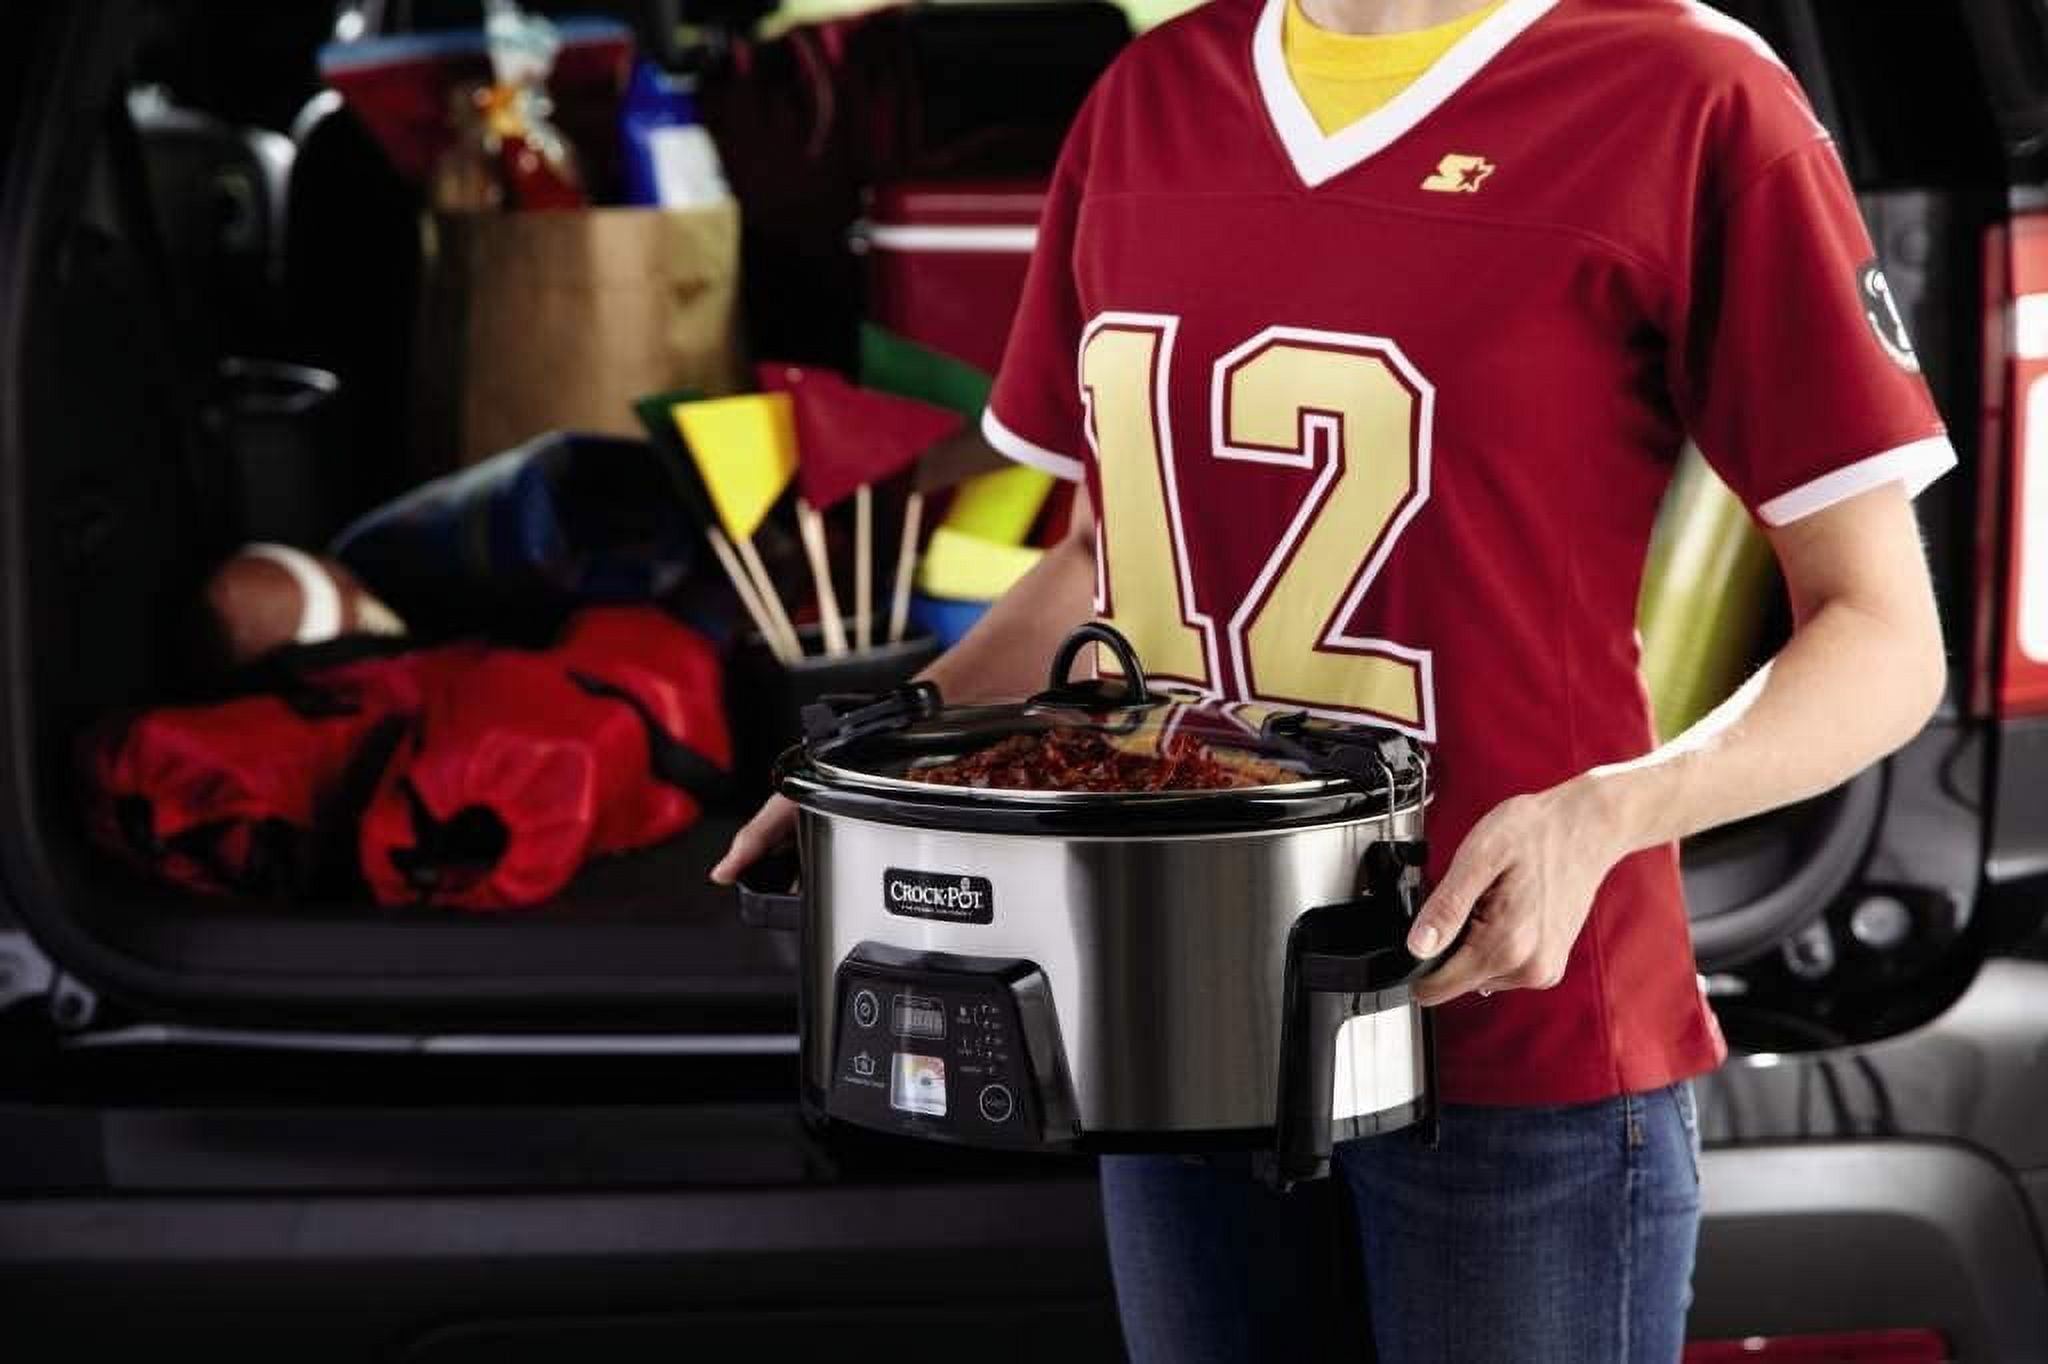 Crock-Pot 6-Quart Countdown Programmable Oval Slow Cooker with Dipper,  Stainless Steel, SCCPVC605-S